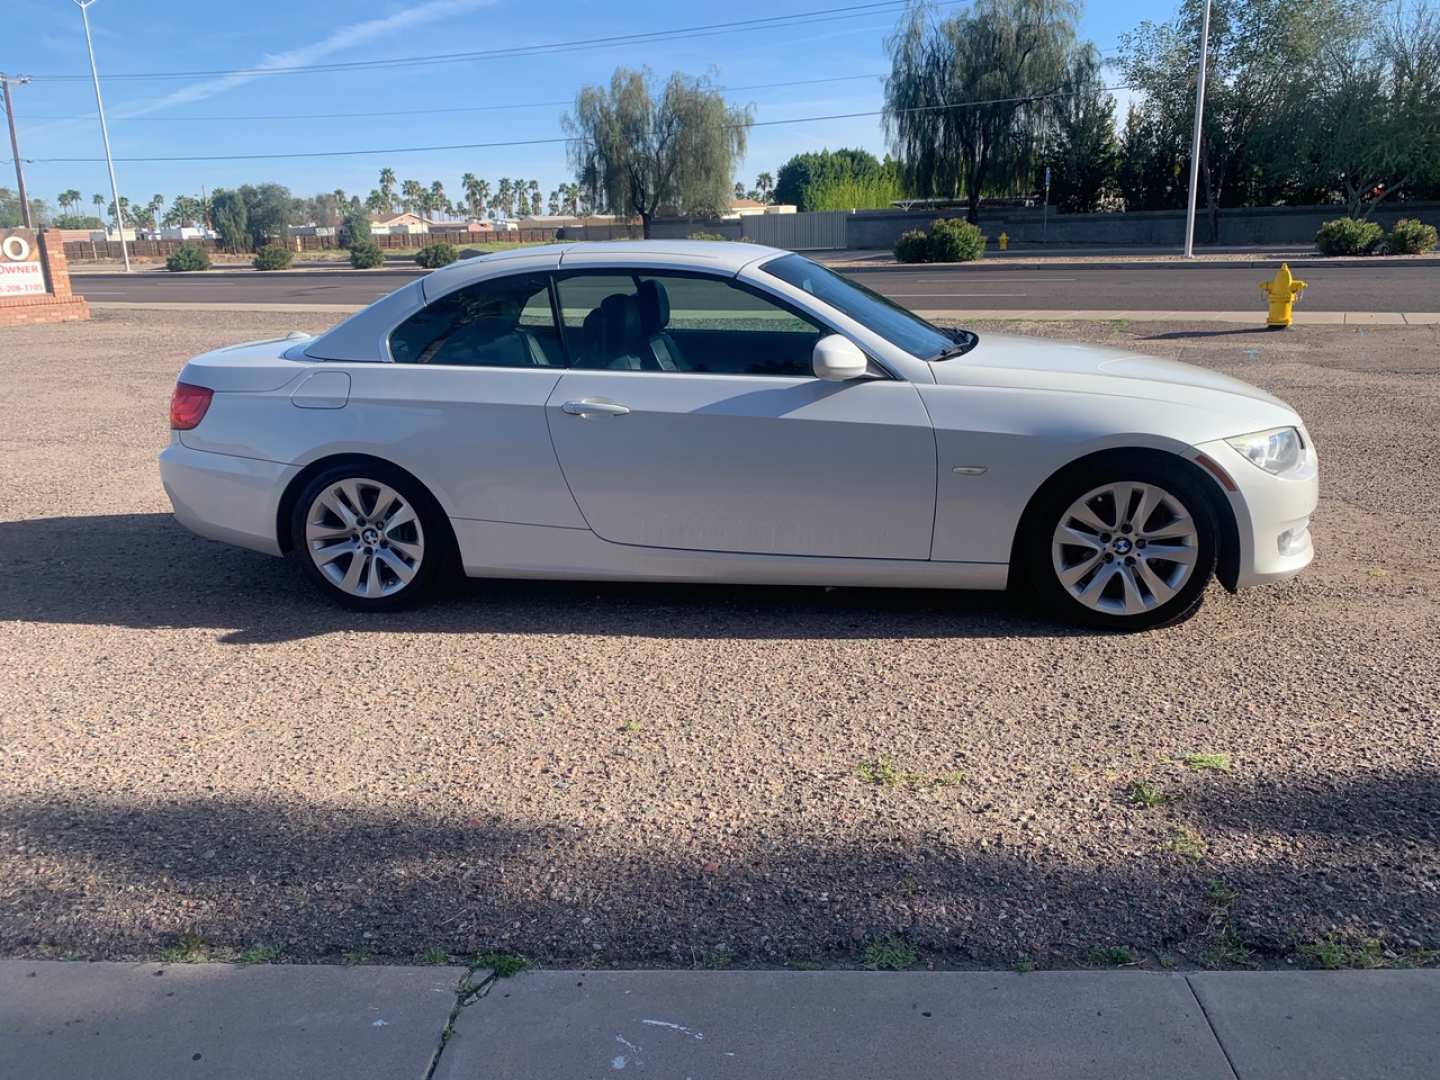 4th Image of a 2011 BMW 3 SERIES 328I